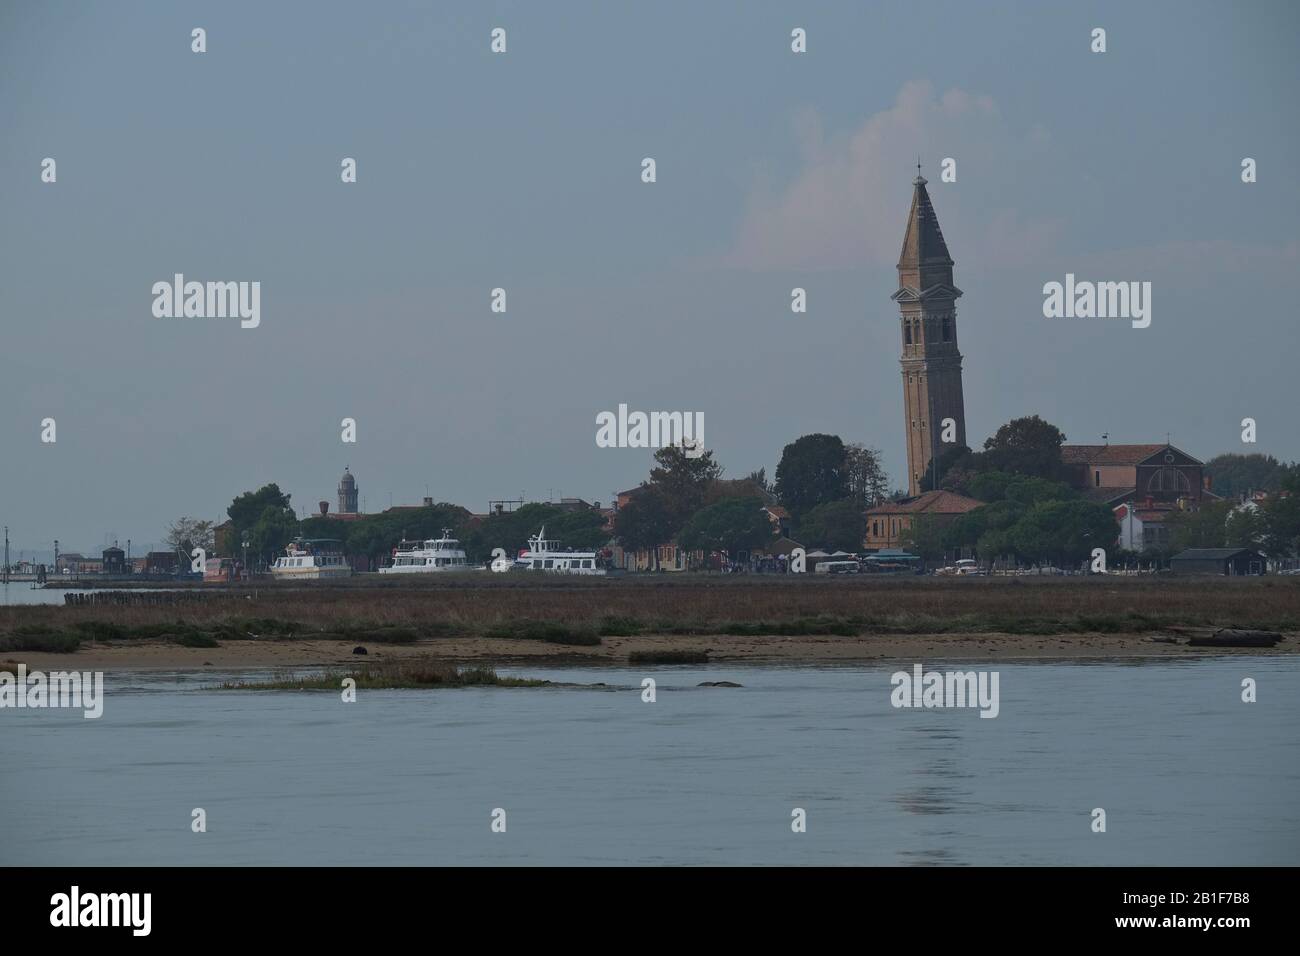 Burano Island & the ancient Chiesa di San Martino,  its leaning 17th-century church bell tower seen from the lagoon across salt marshes, Venice, Italy Stock Photo